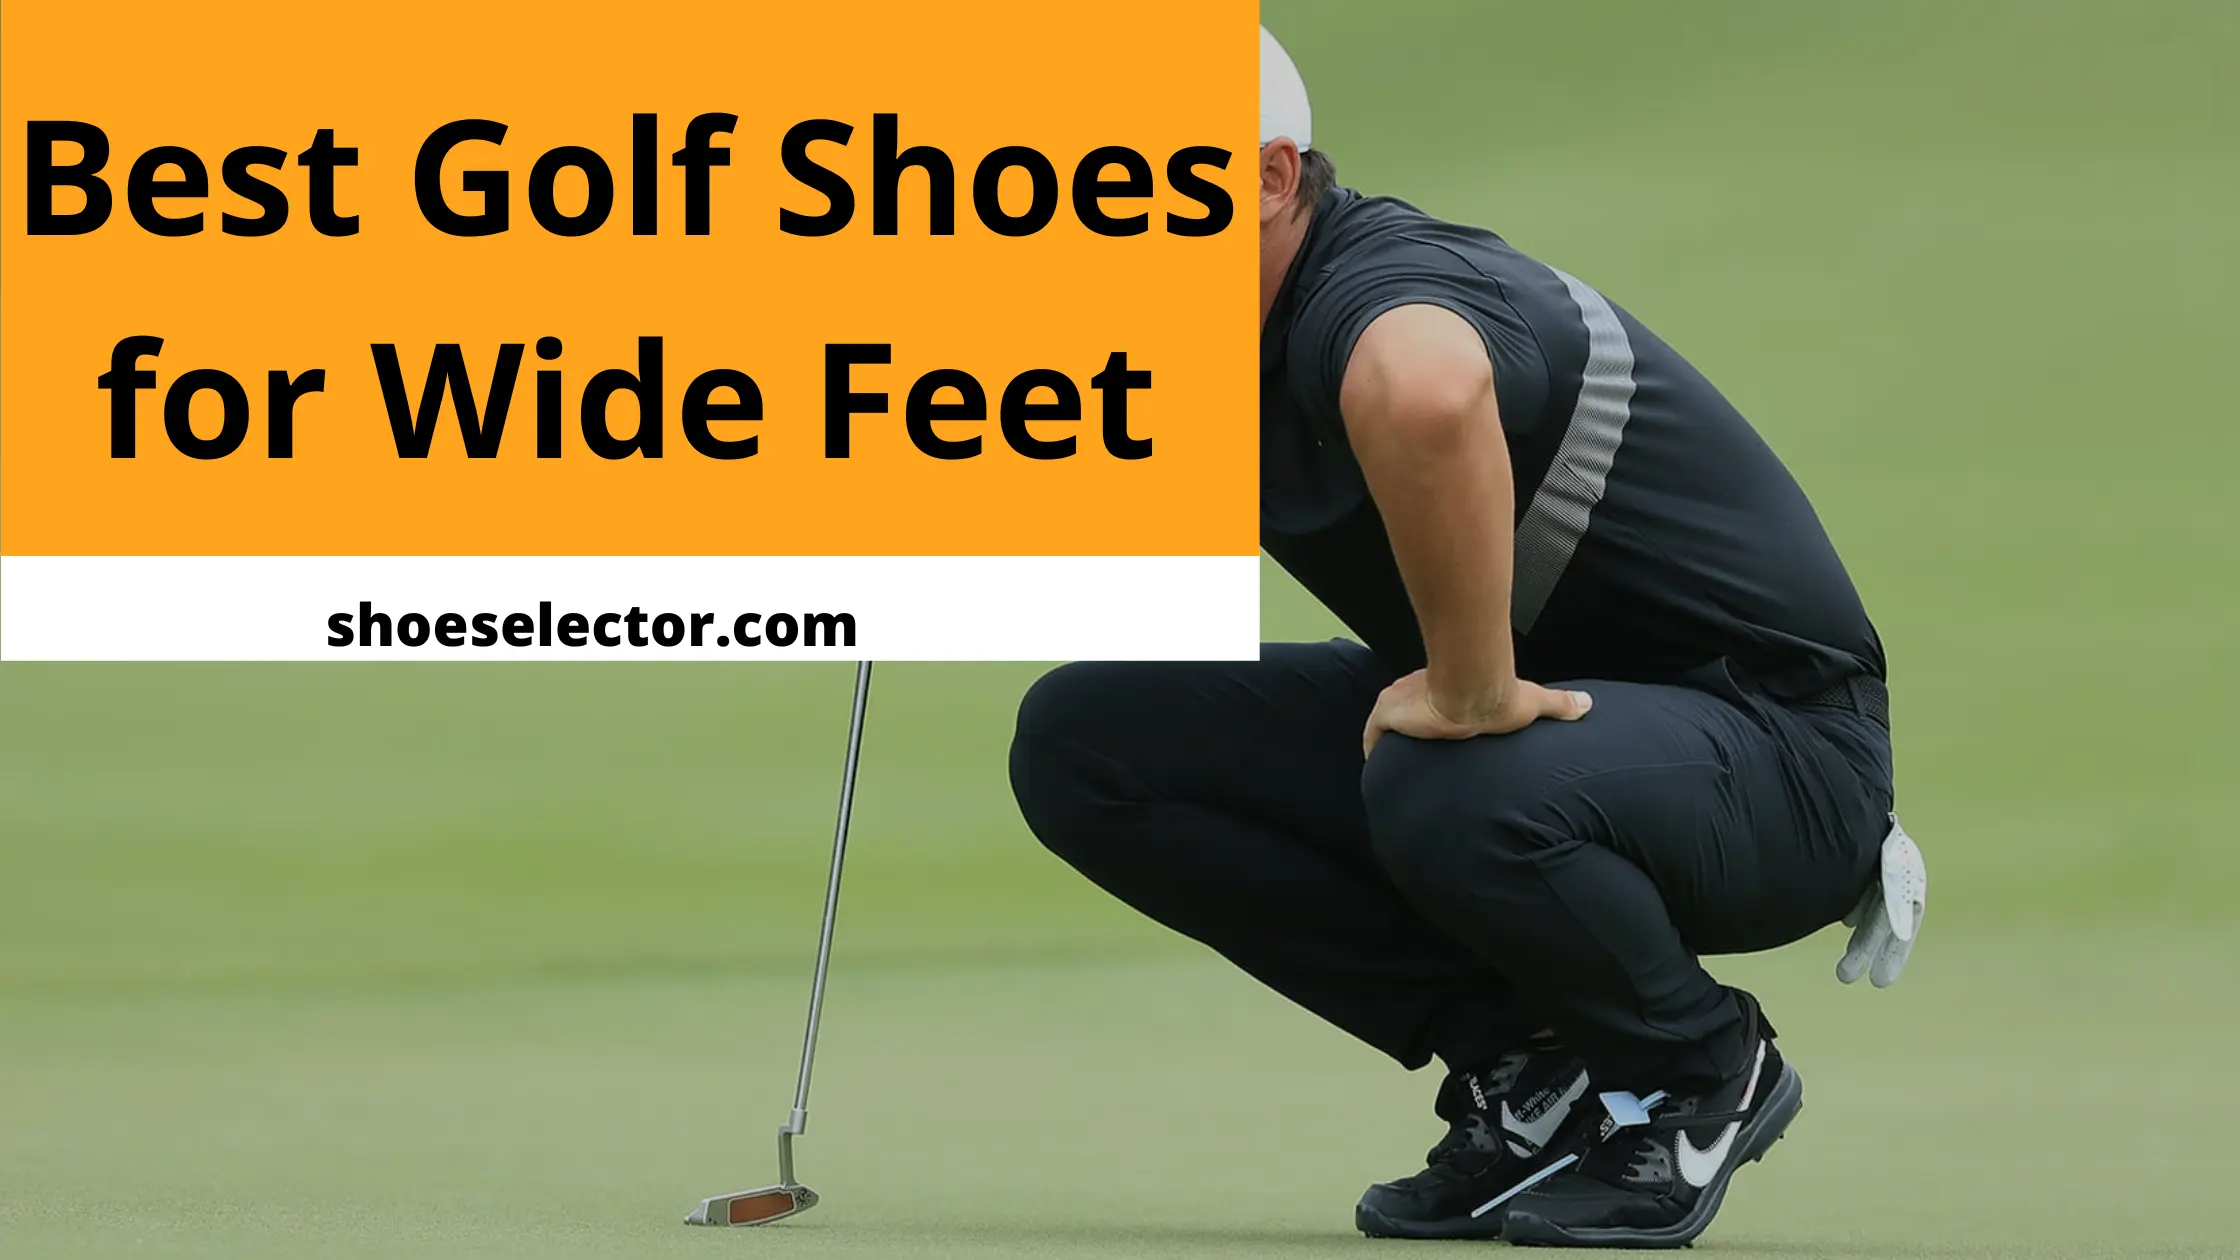 Best Golf Shoes For Wide Feet - Supportive And Stylish